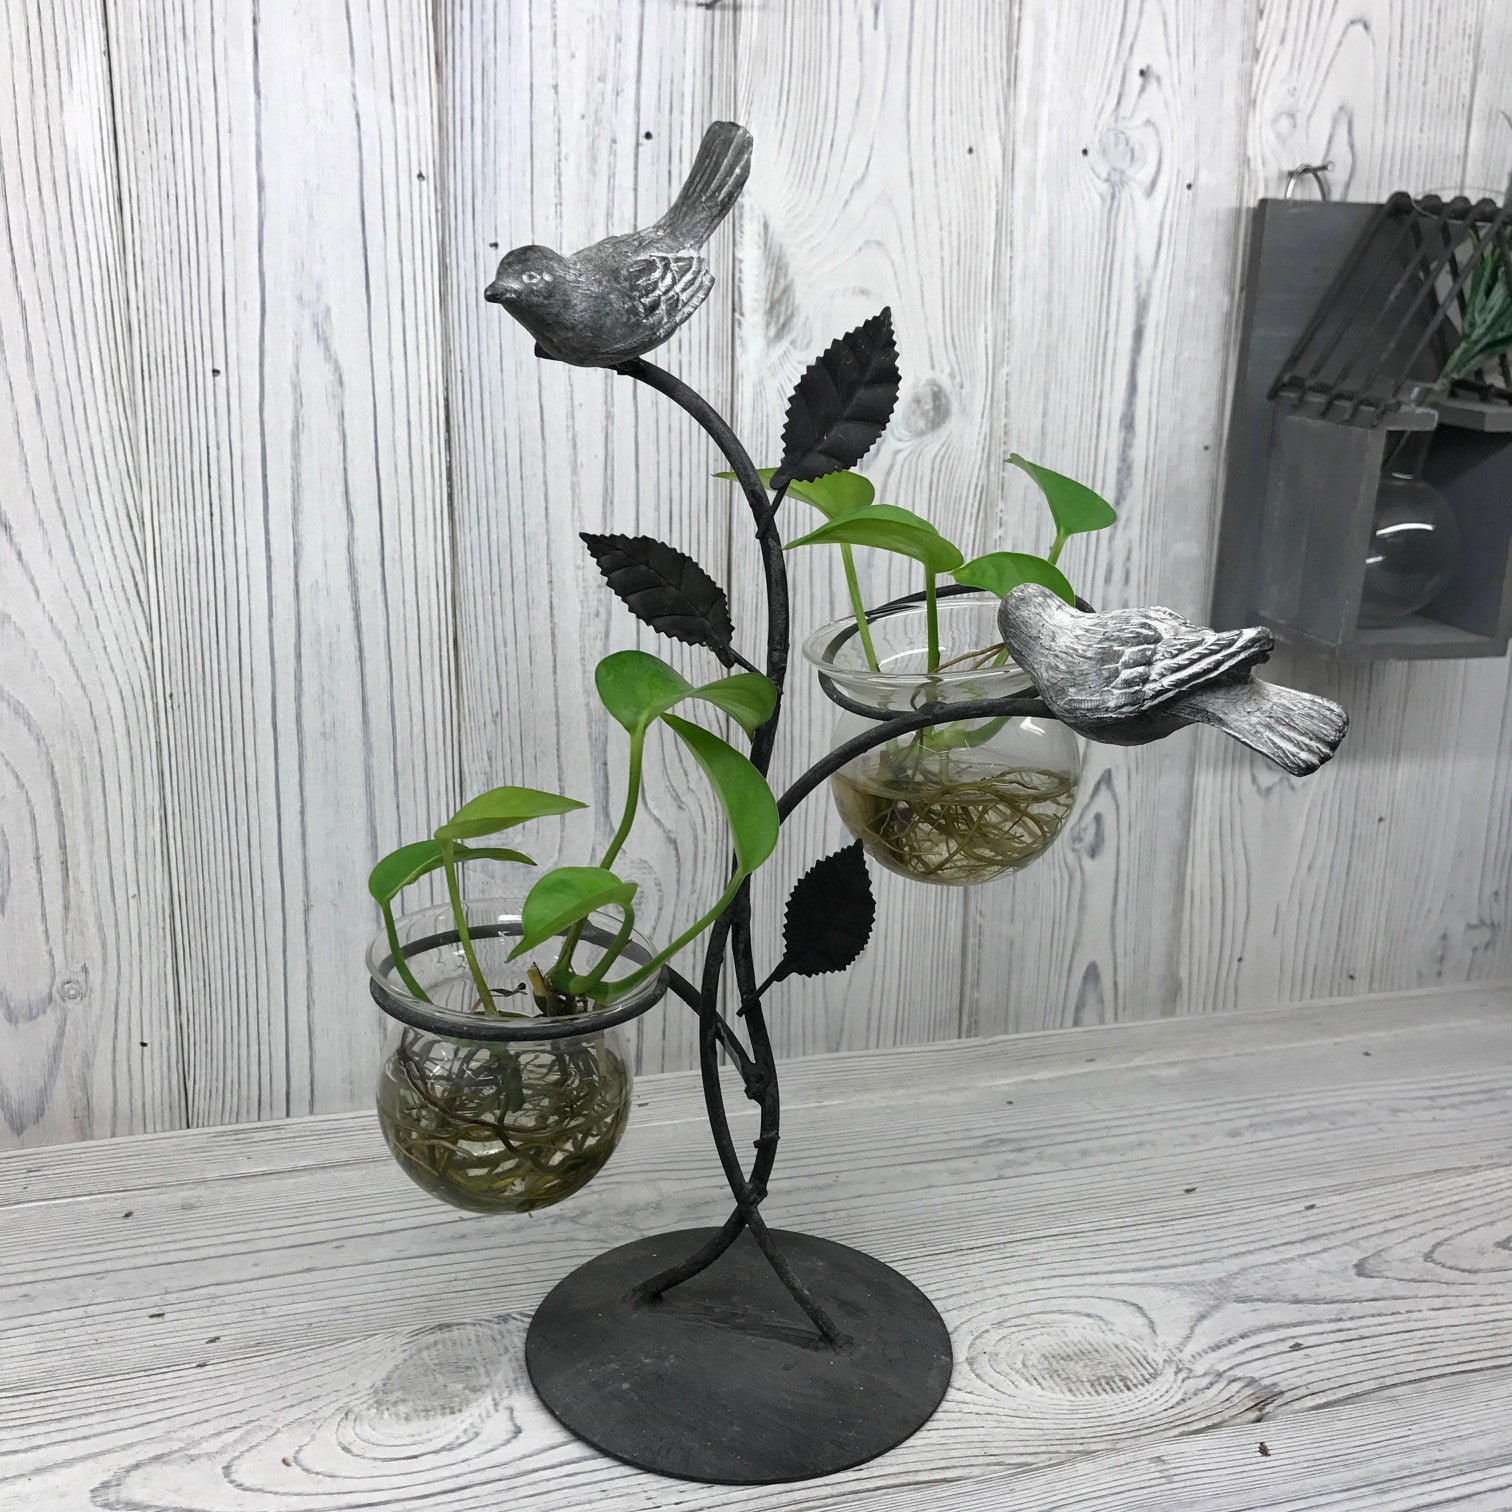 Hydroponic Home Décor - Two Pots and Birds